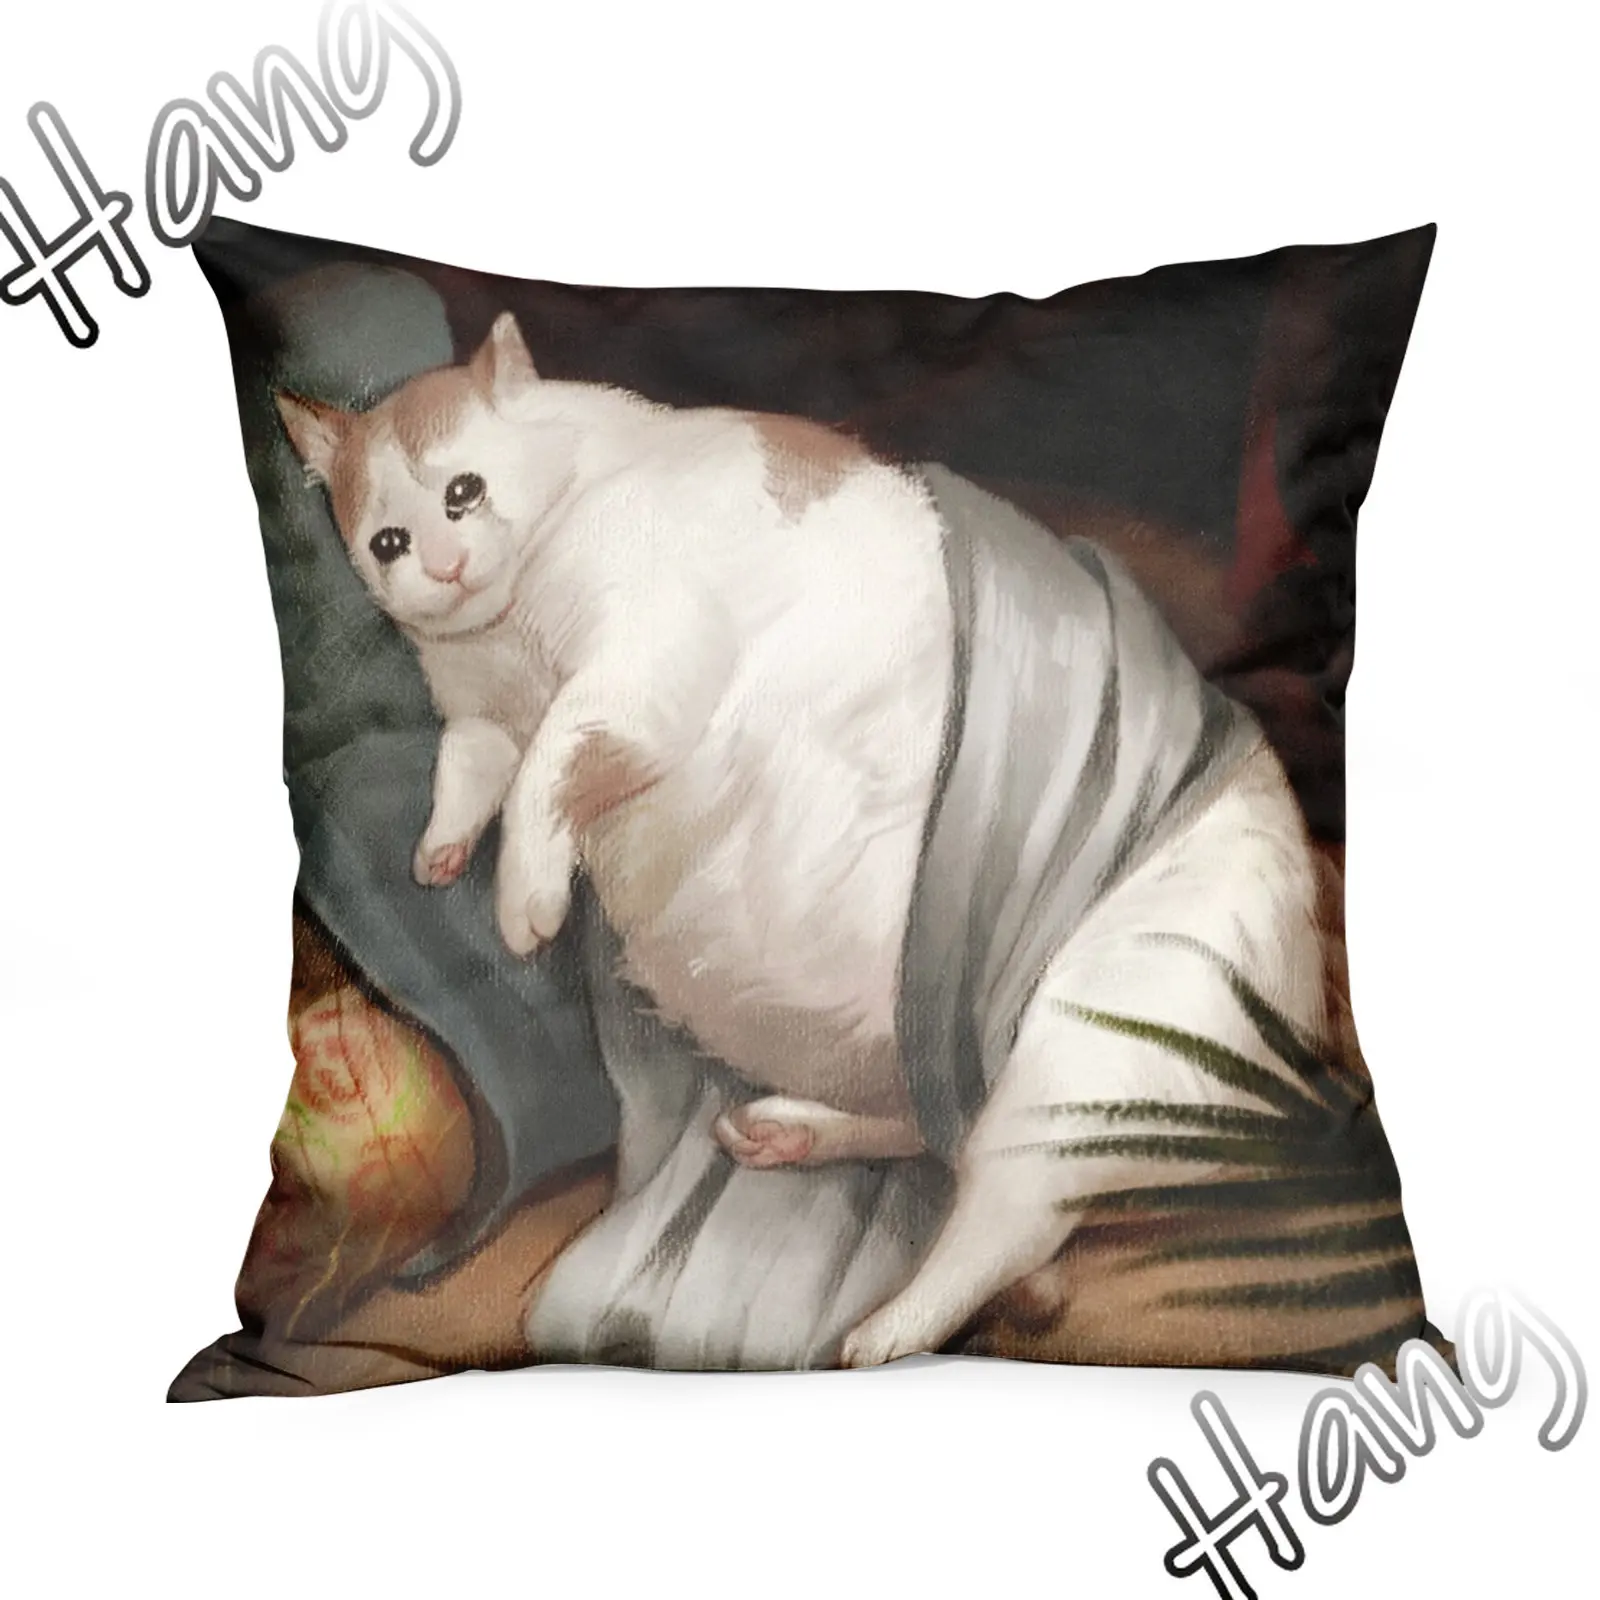 

Crying Fat Cute Cats Vintage Pillowcase Custom Square Pillow Cover Case Zipper Interior Pillowcase Gift for Cat Lover